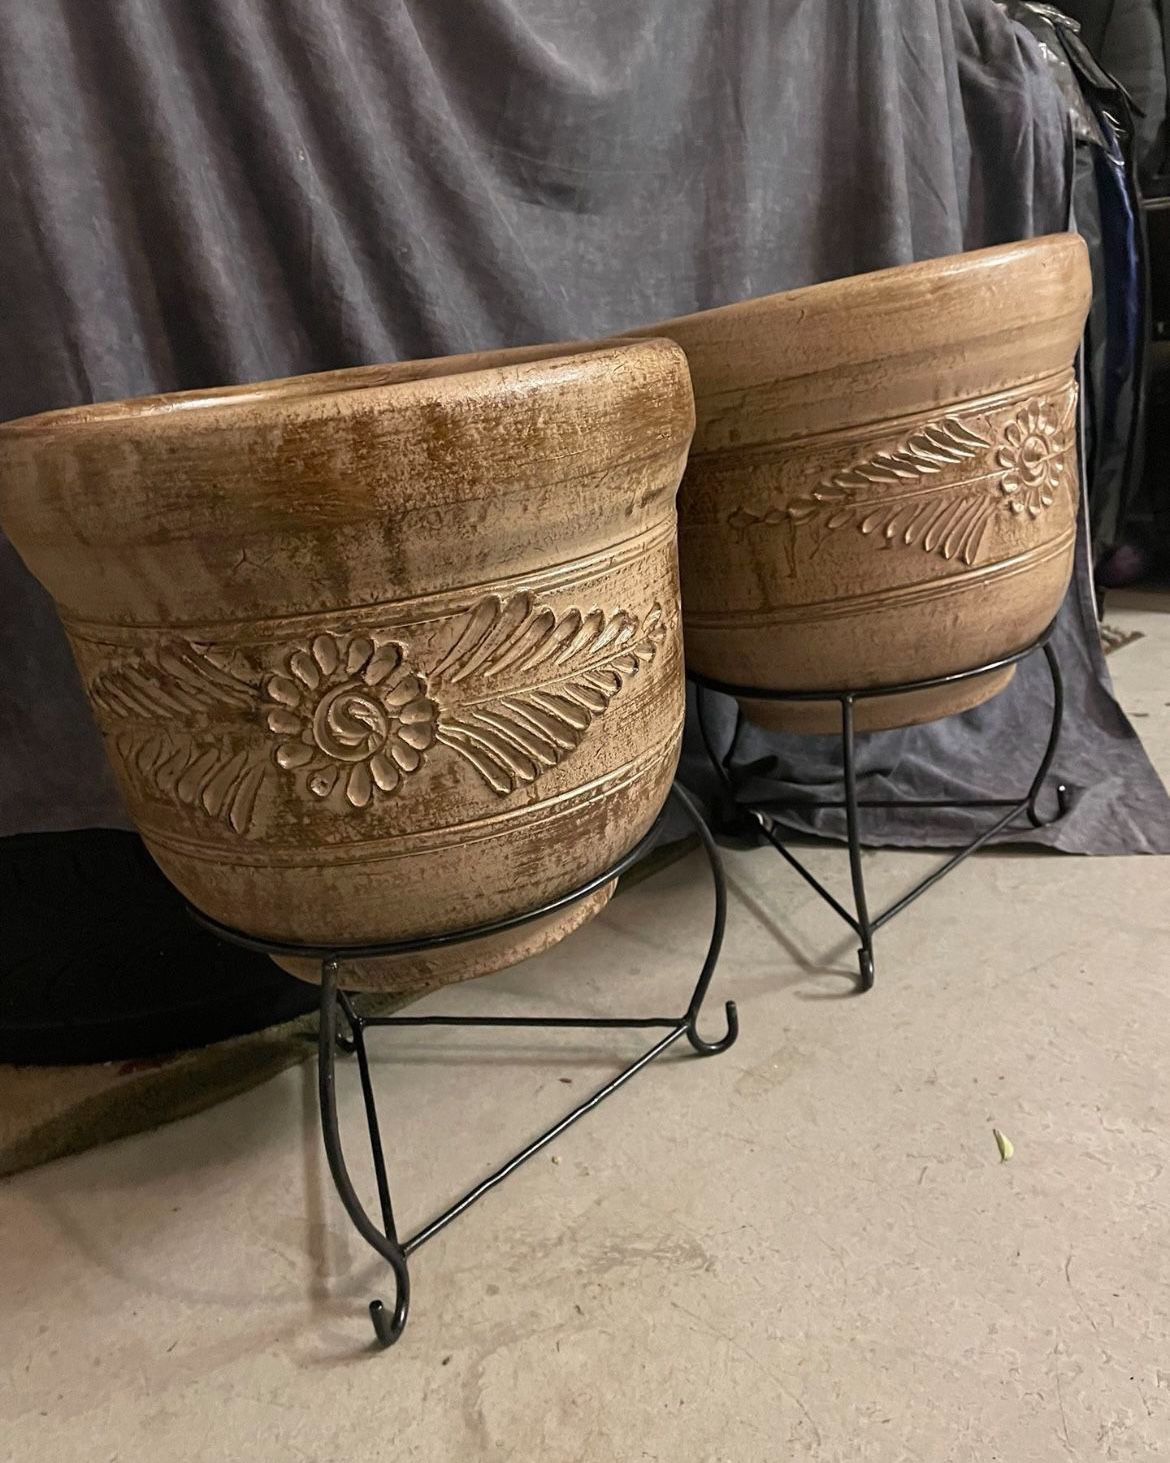 BRAND NEW FLOWER POTS MADE IN MEXICO 